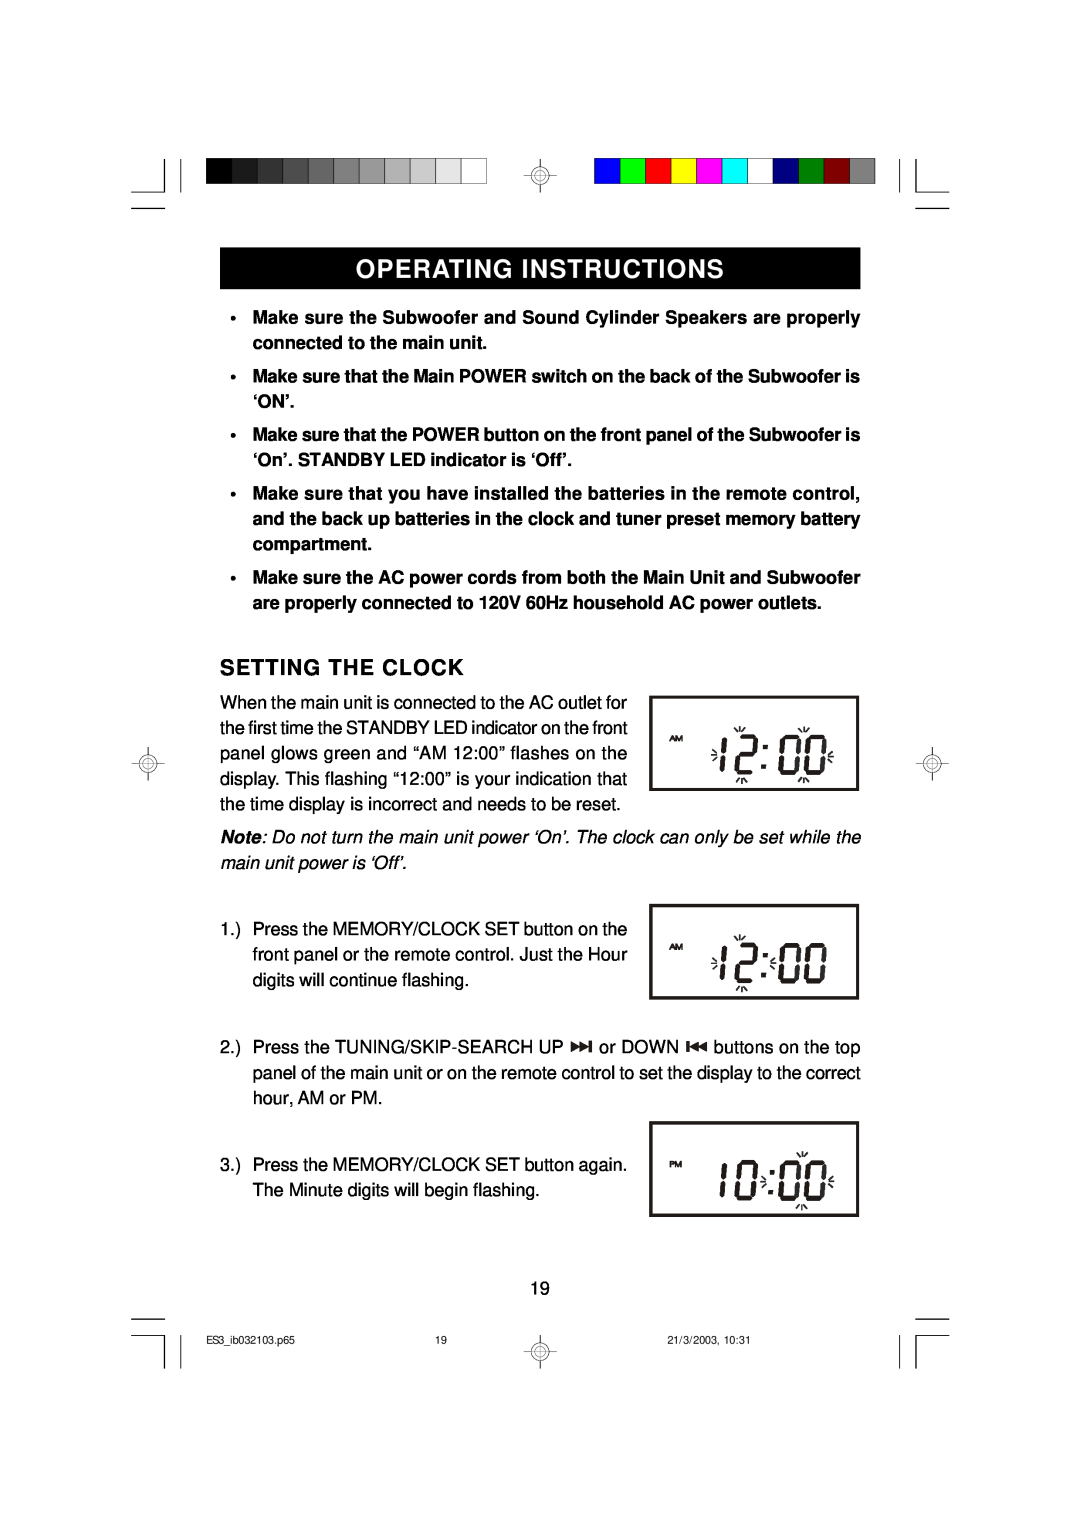 Emerson ES3 owner manual Operating Instructions, Setting The Clock 